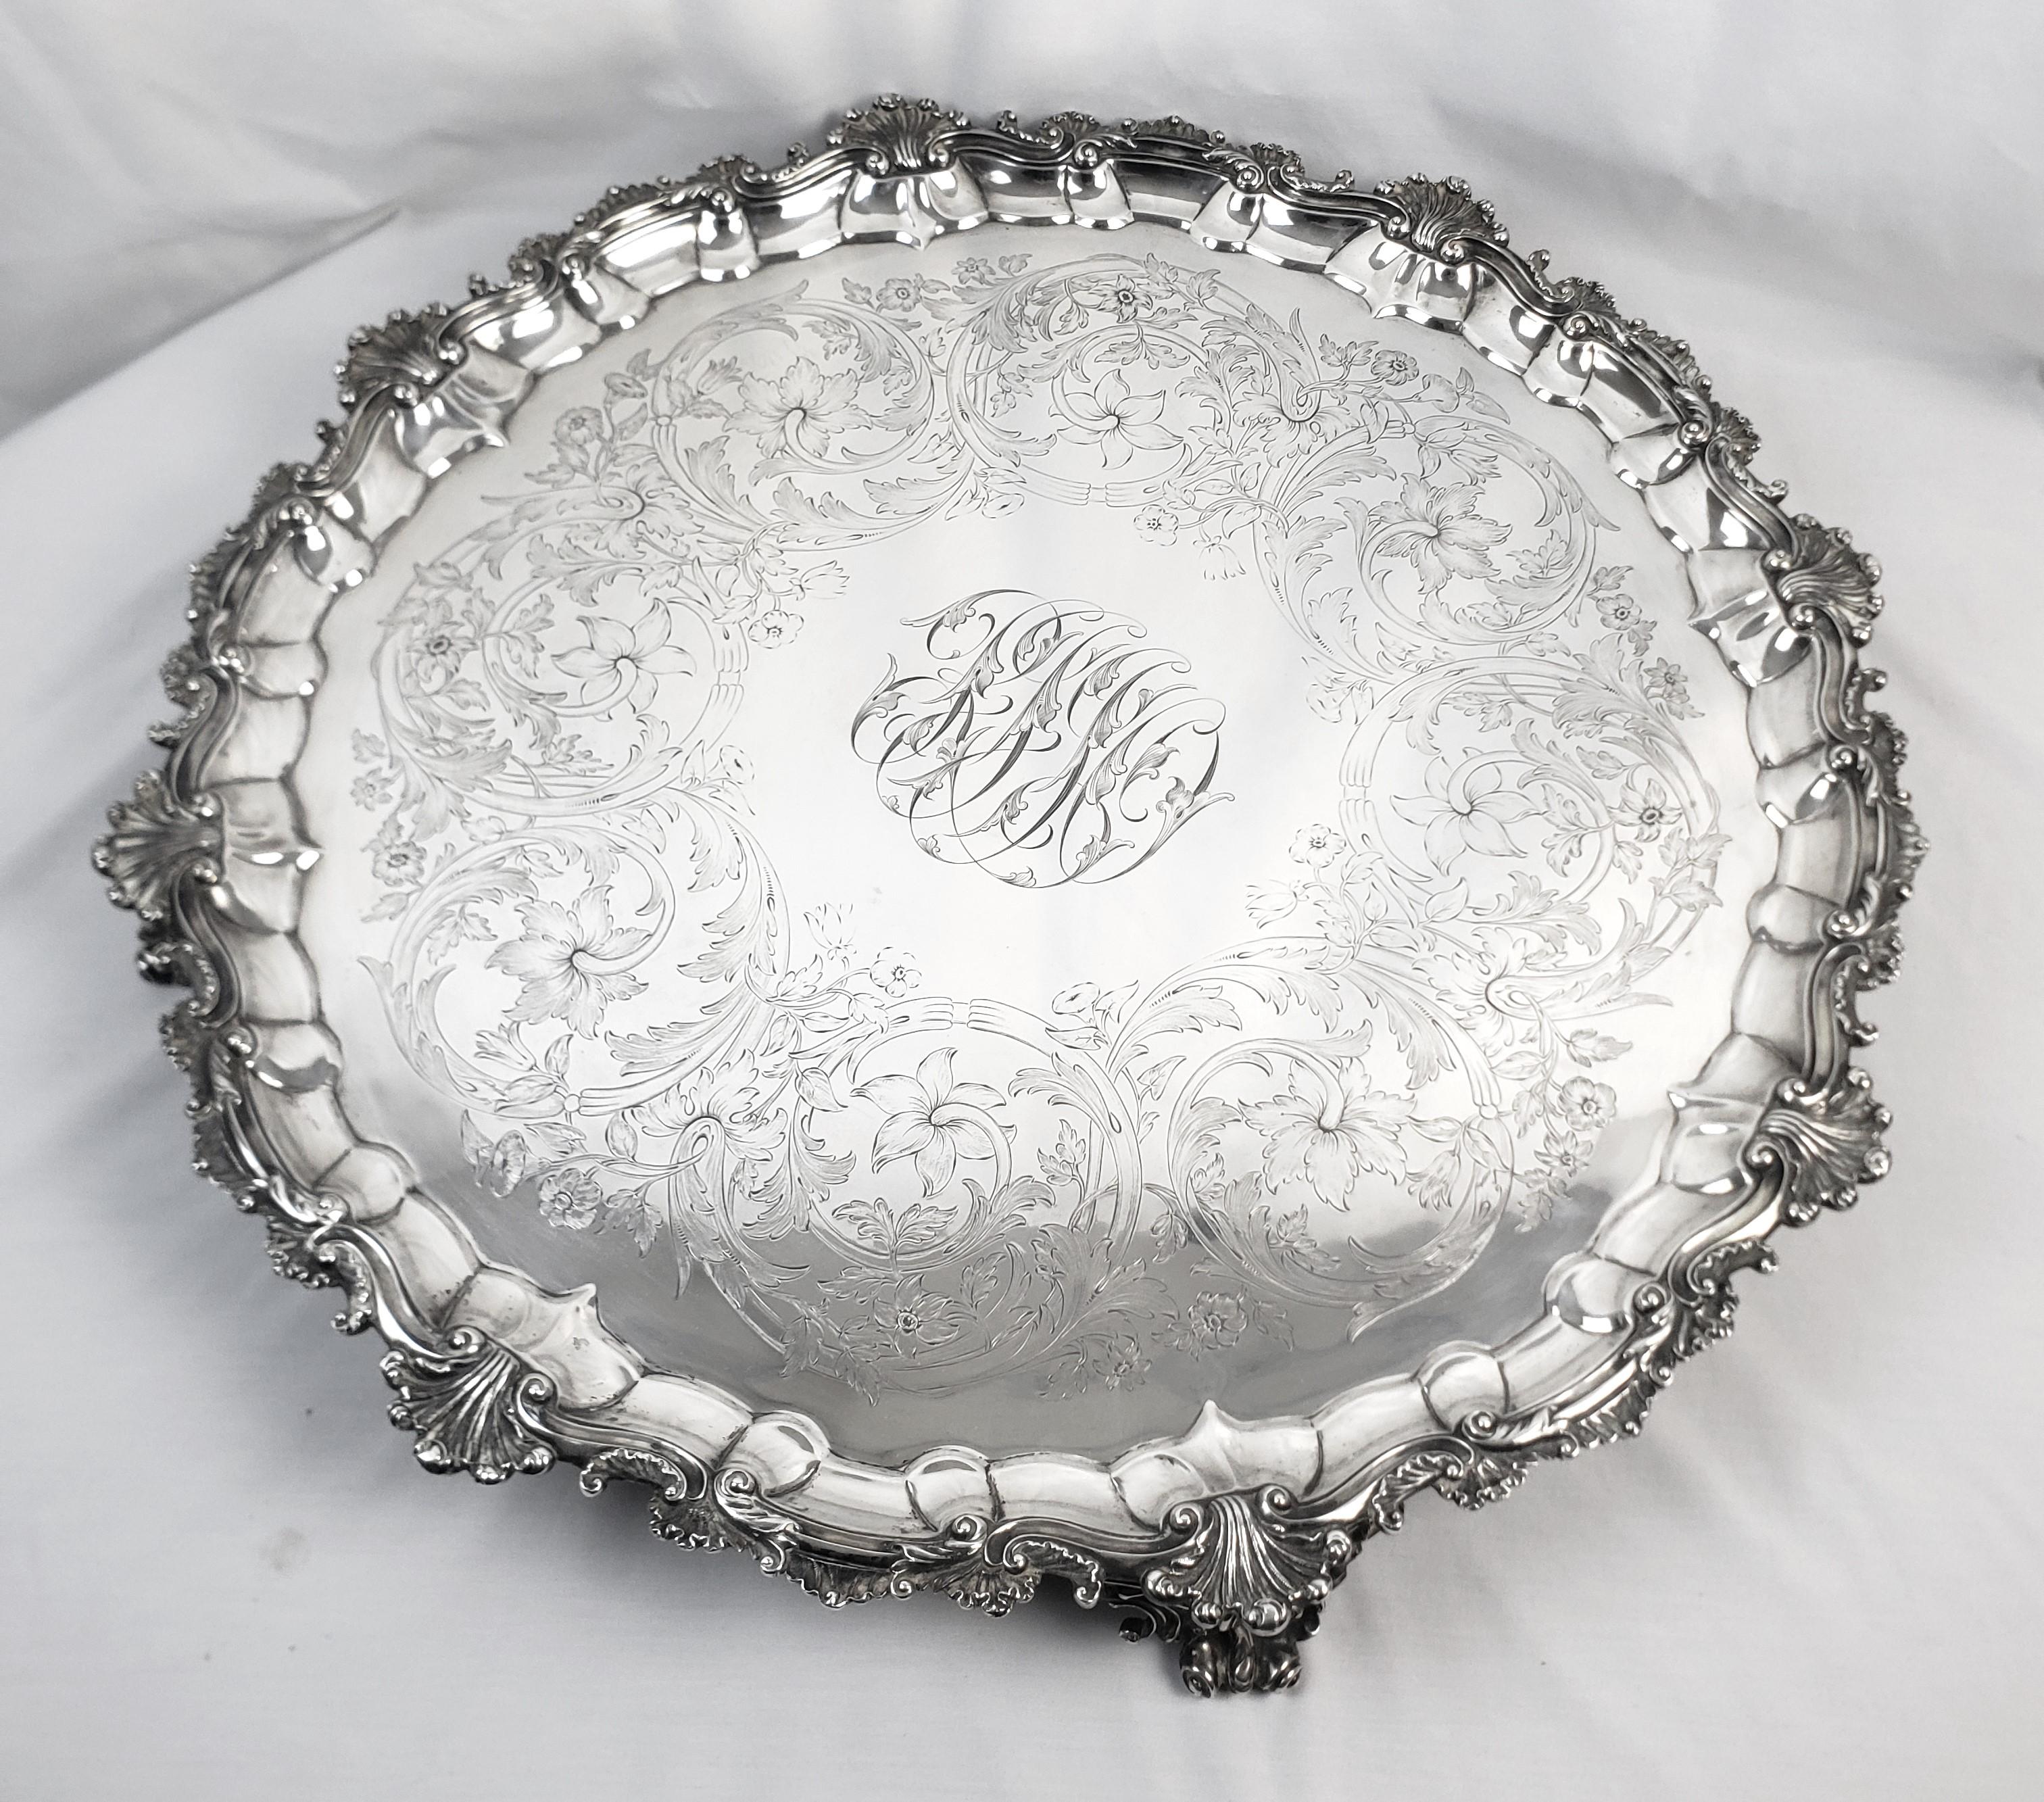 High Victorian Huge Antique Sterling Silver Salver or Footed Tray with Ornate Floral Engraving For Sale